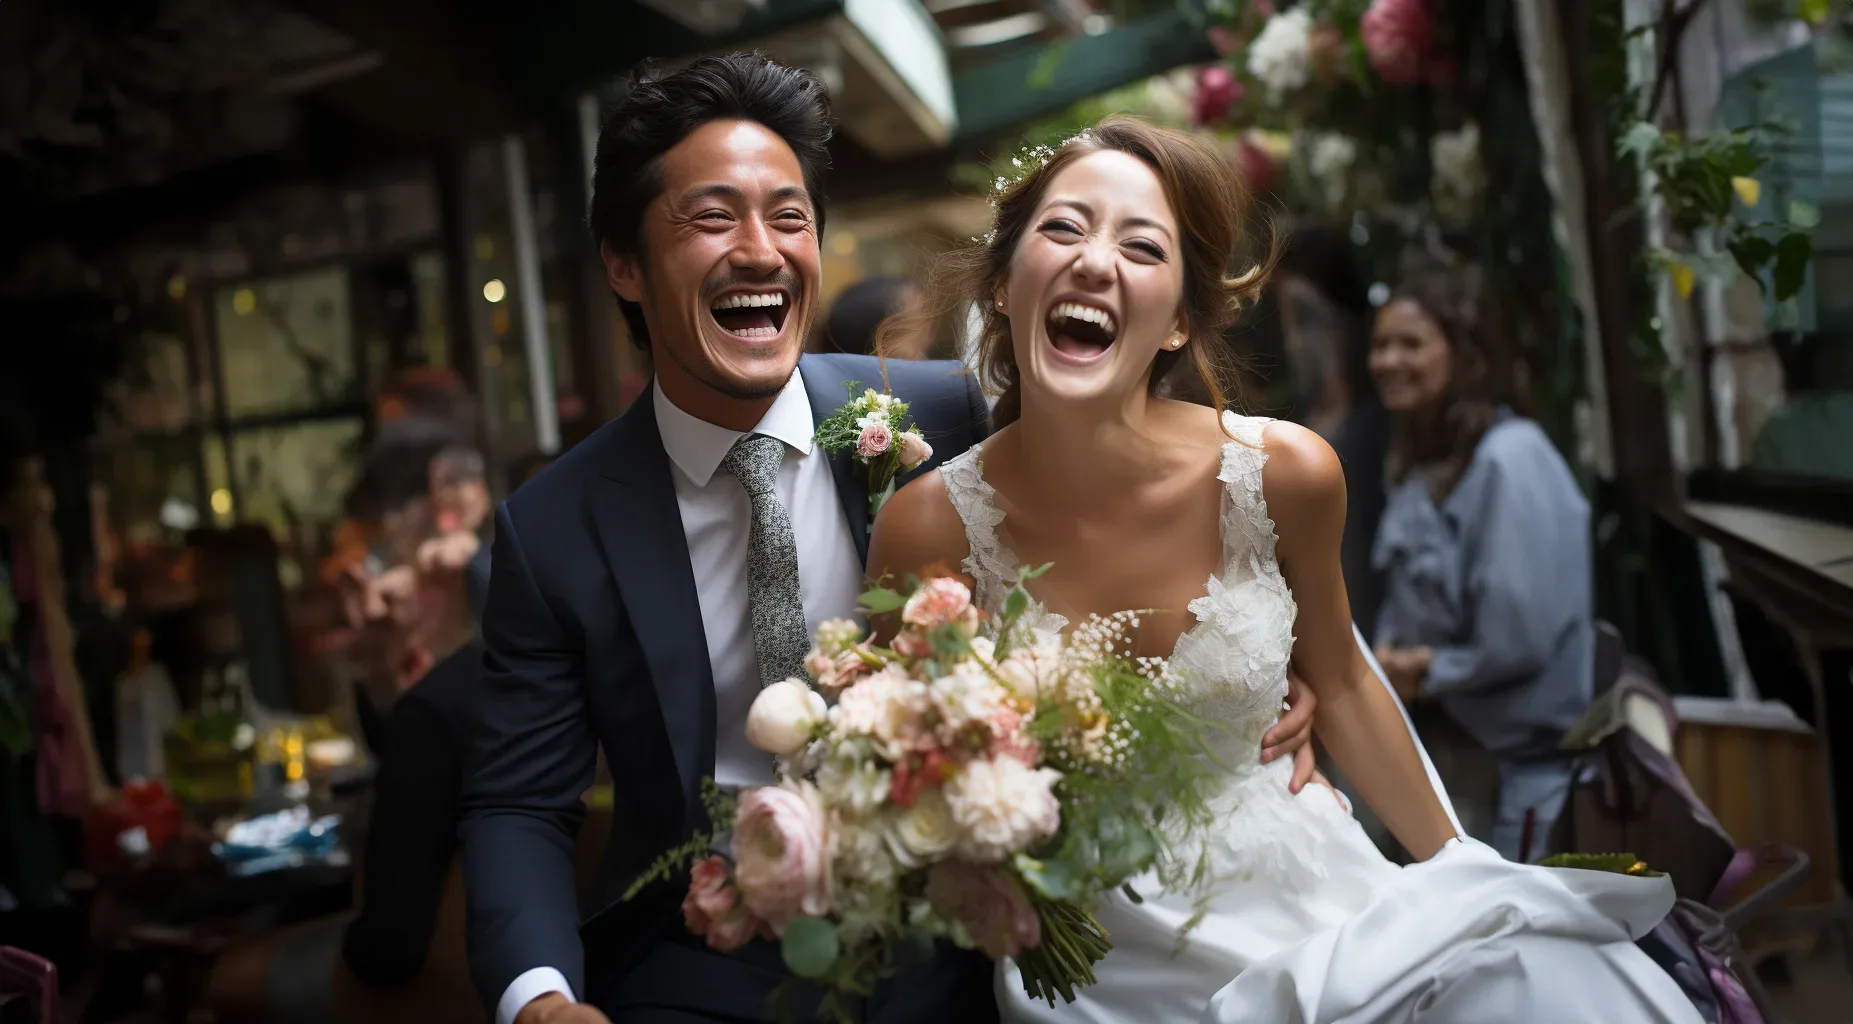 A bride and groom laughing as they walk down the street.